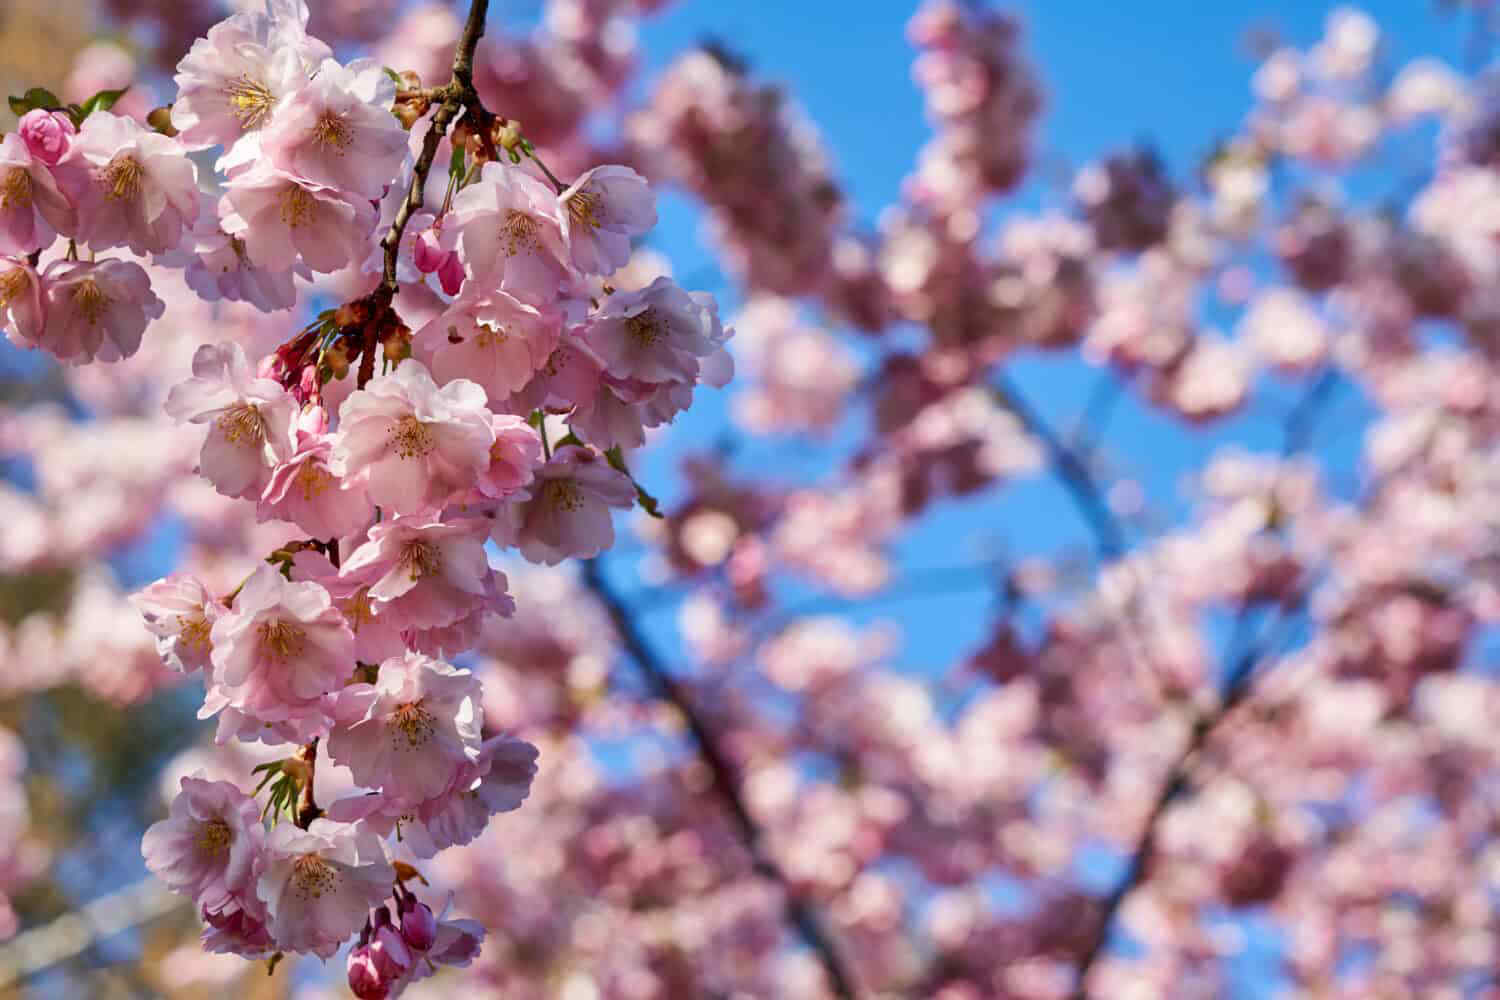 The Best Places to See Cherry Blossoms in the USA